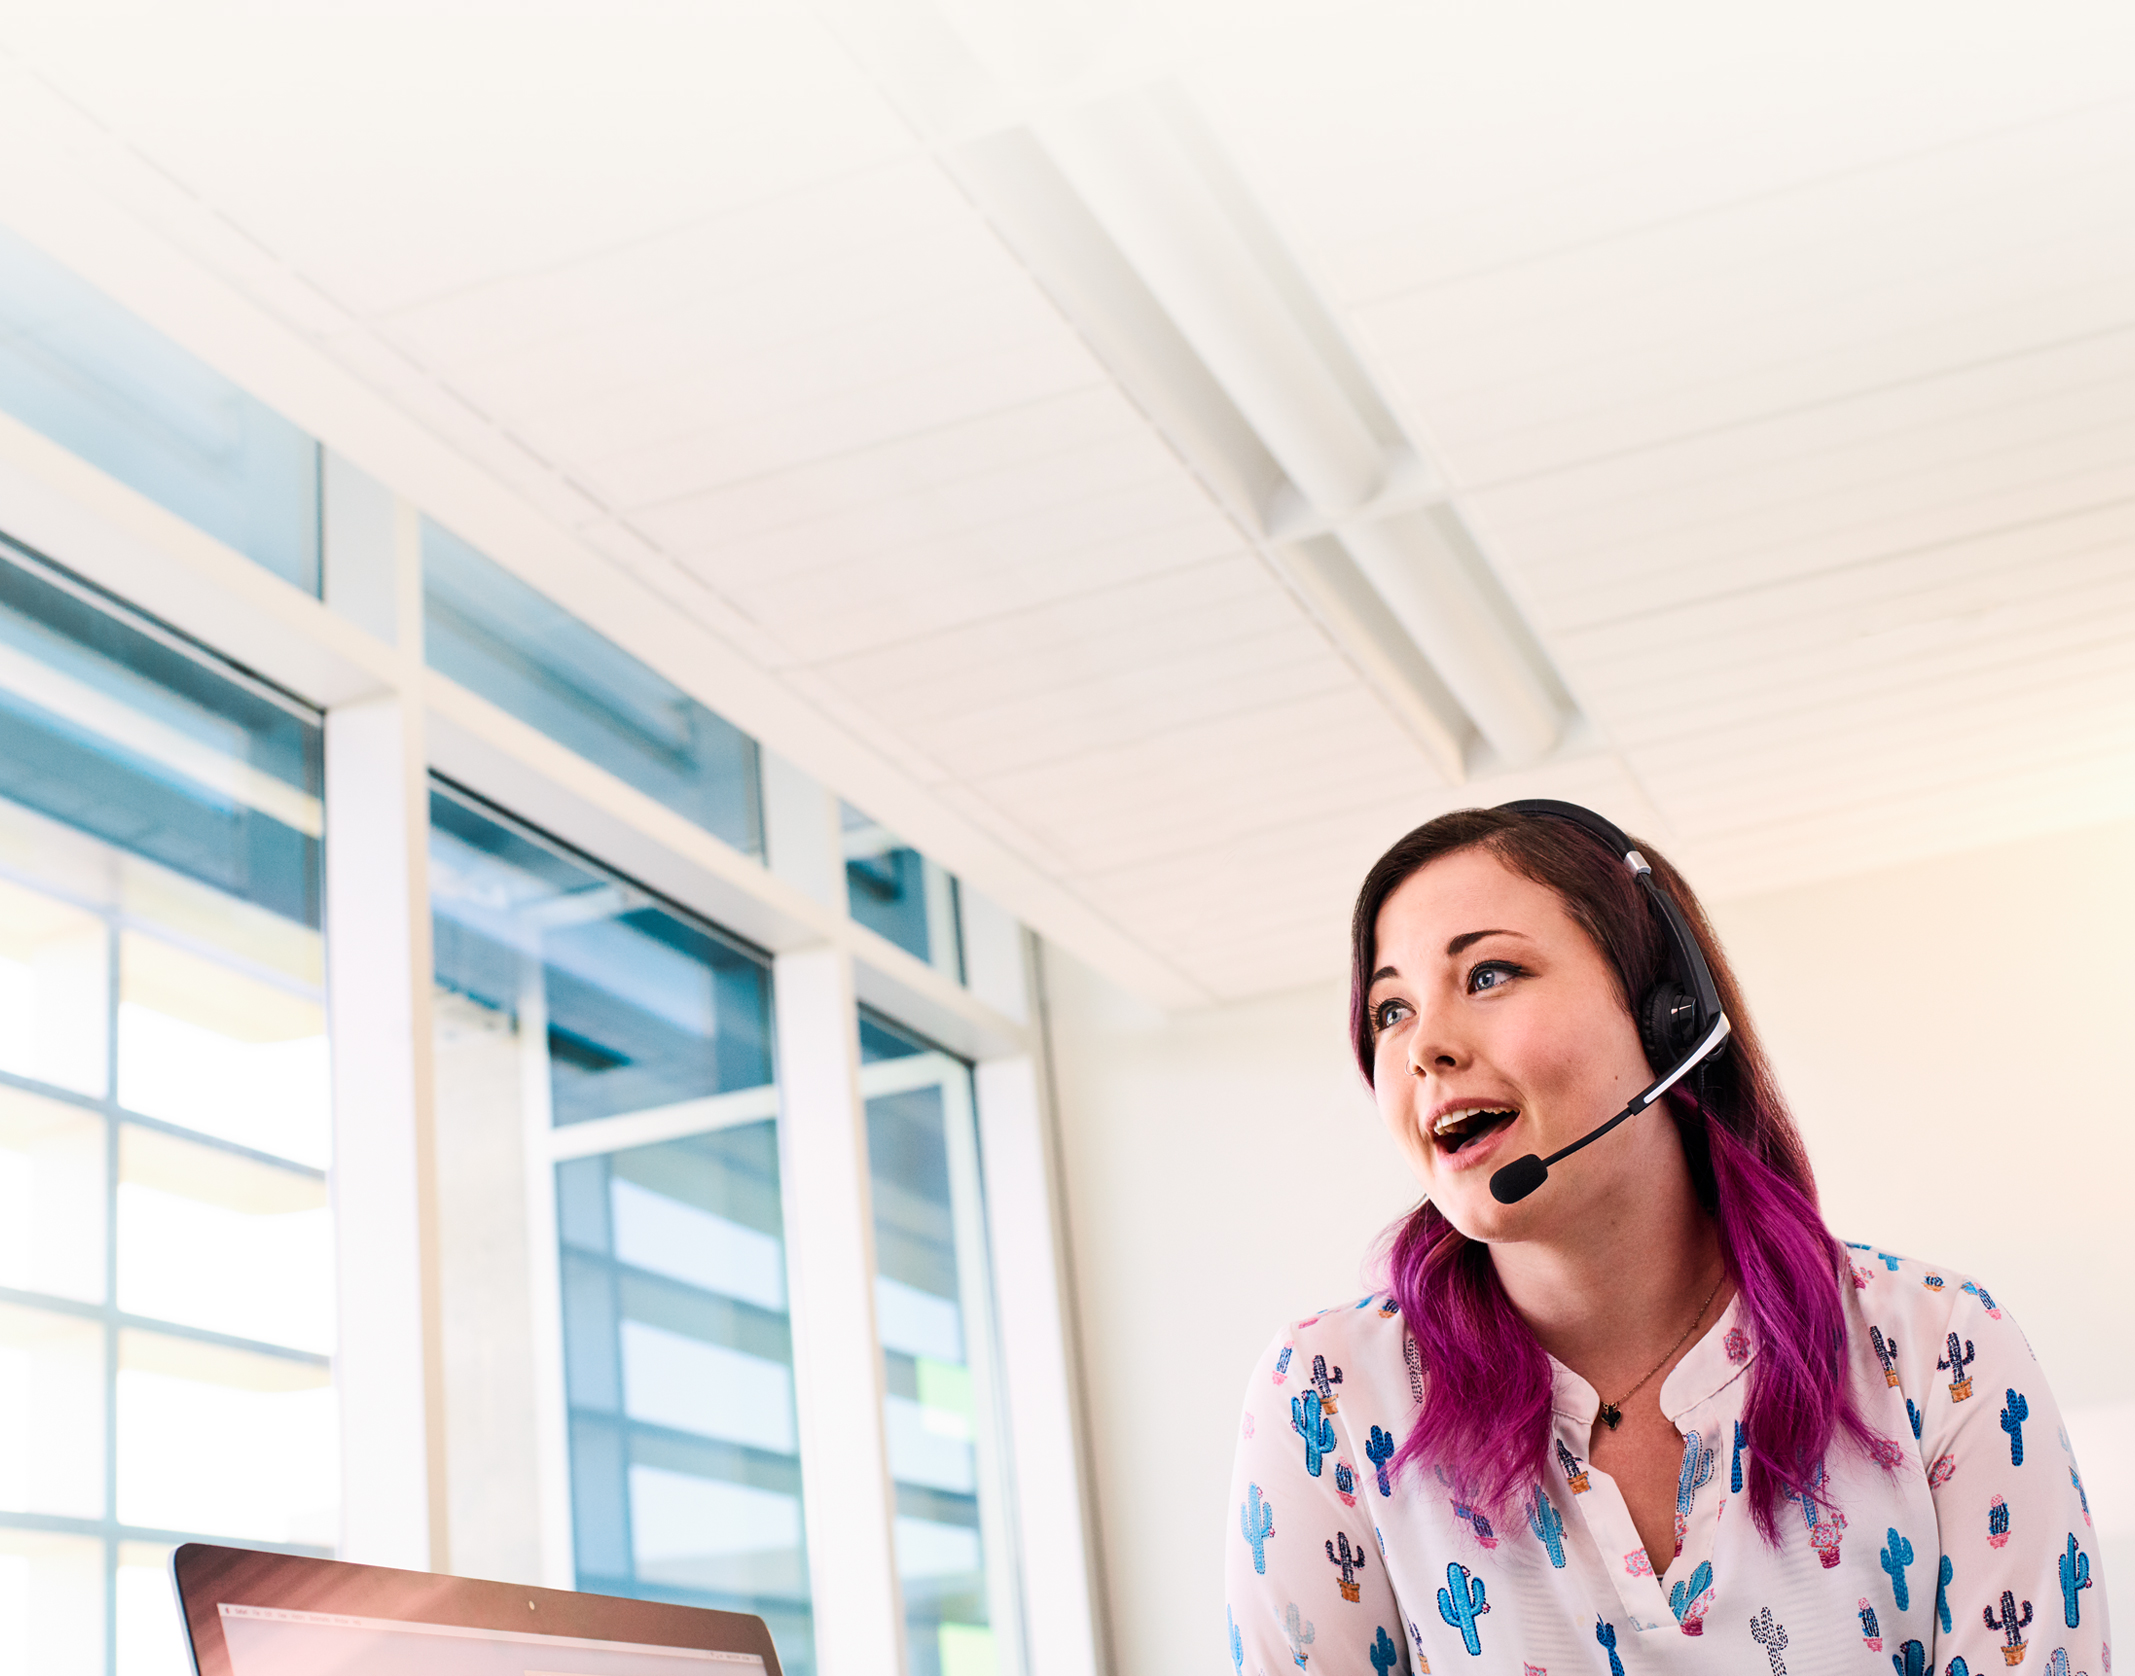 A female Apple Support Advisor stands as she speaks to a customer through a phone headset.